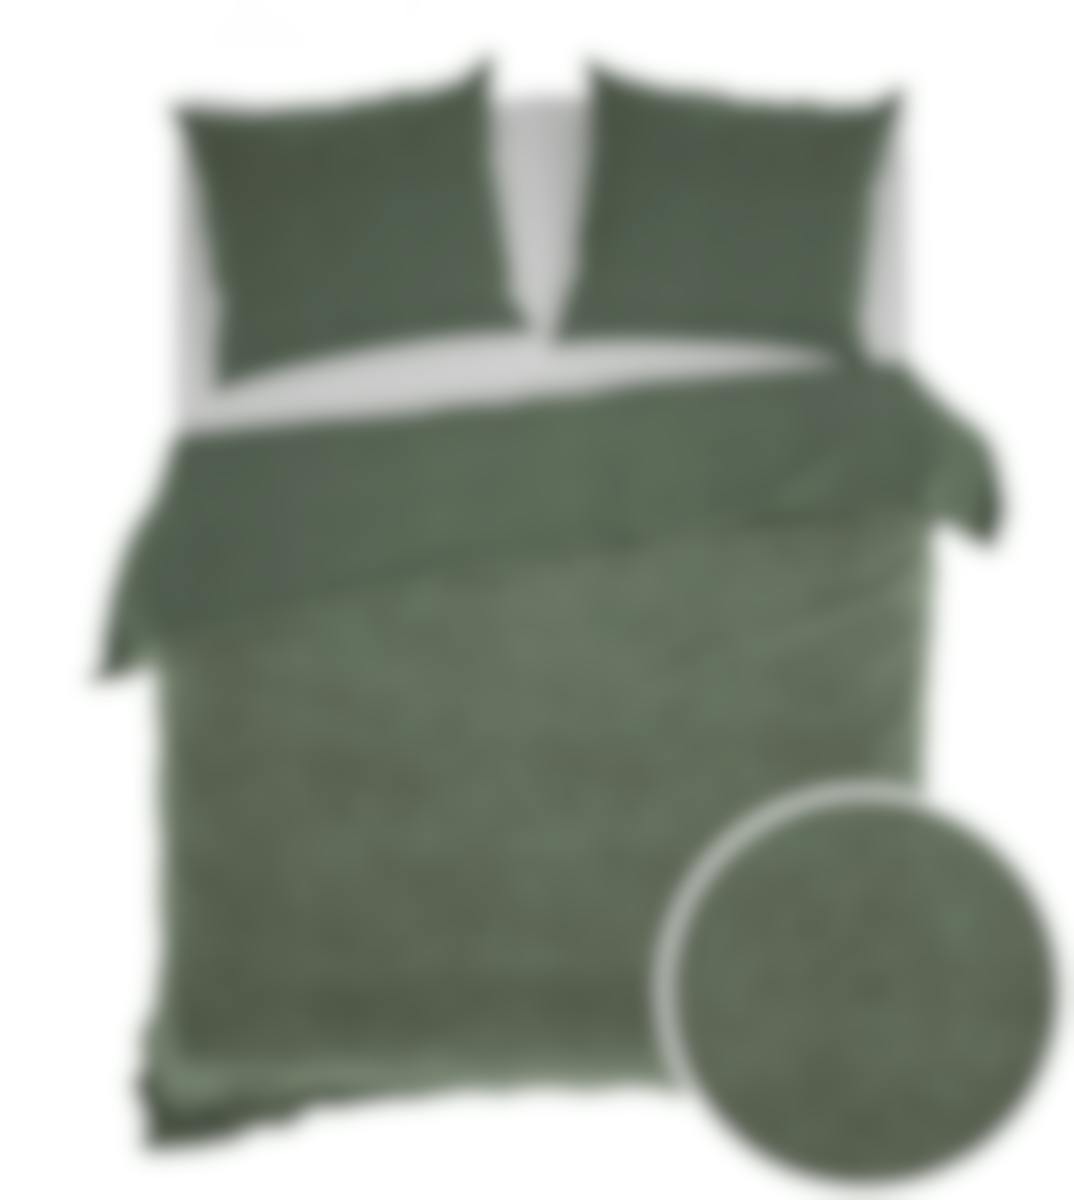 Zo! Home housse de couette Velluto Army Green Velours 260 x 220-240 cm